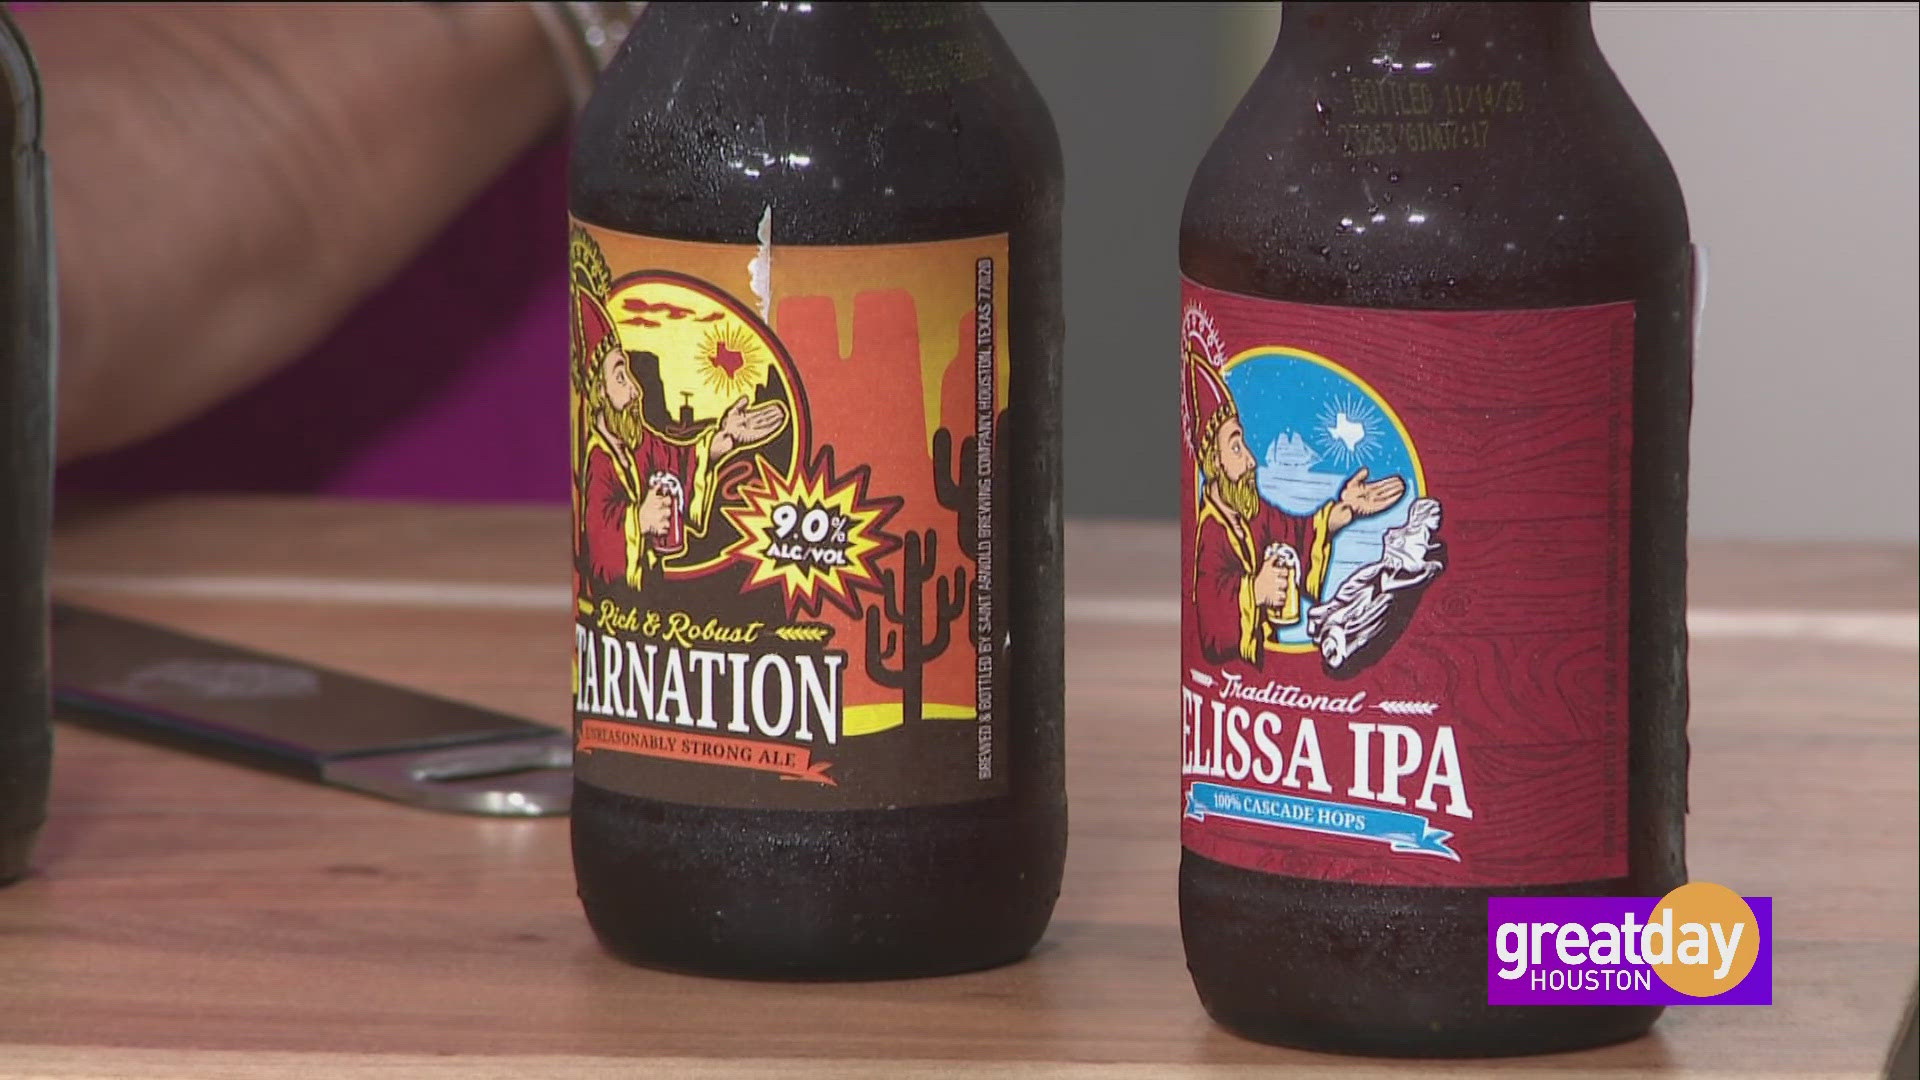 Saint Arnold founder Brock Wagner details his journey to establishing Texas' oldest Craft Brewery, and Kam Franklink shares her role in this weekend's celebration